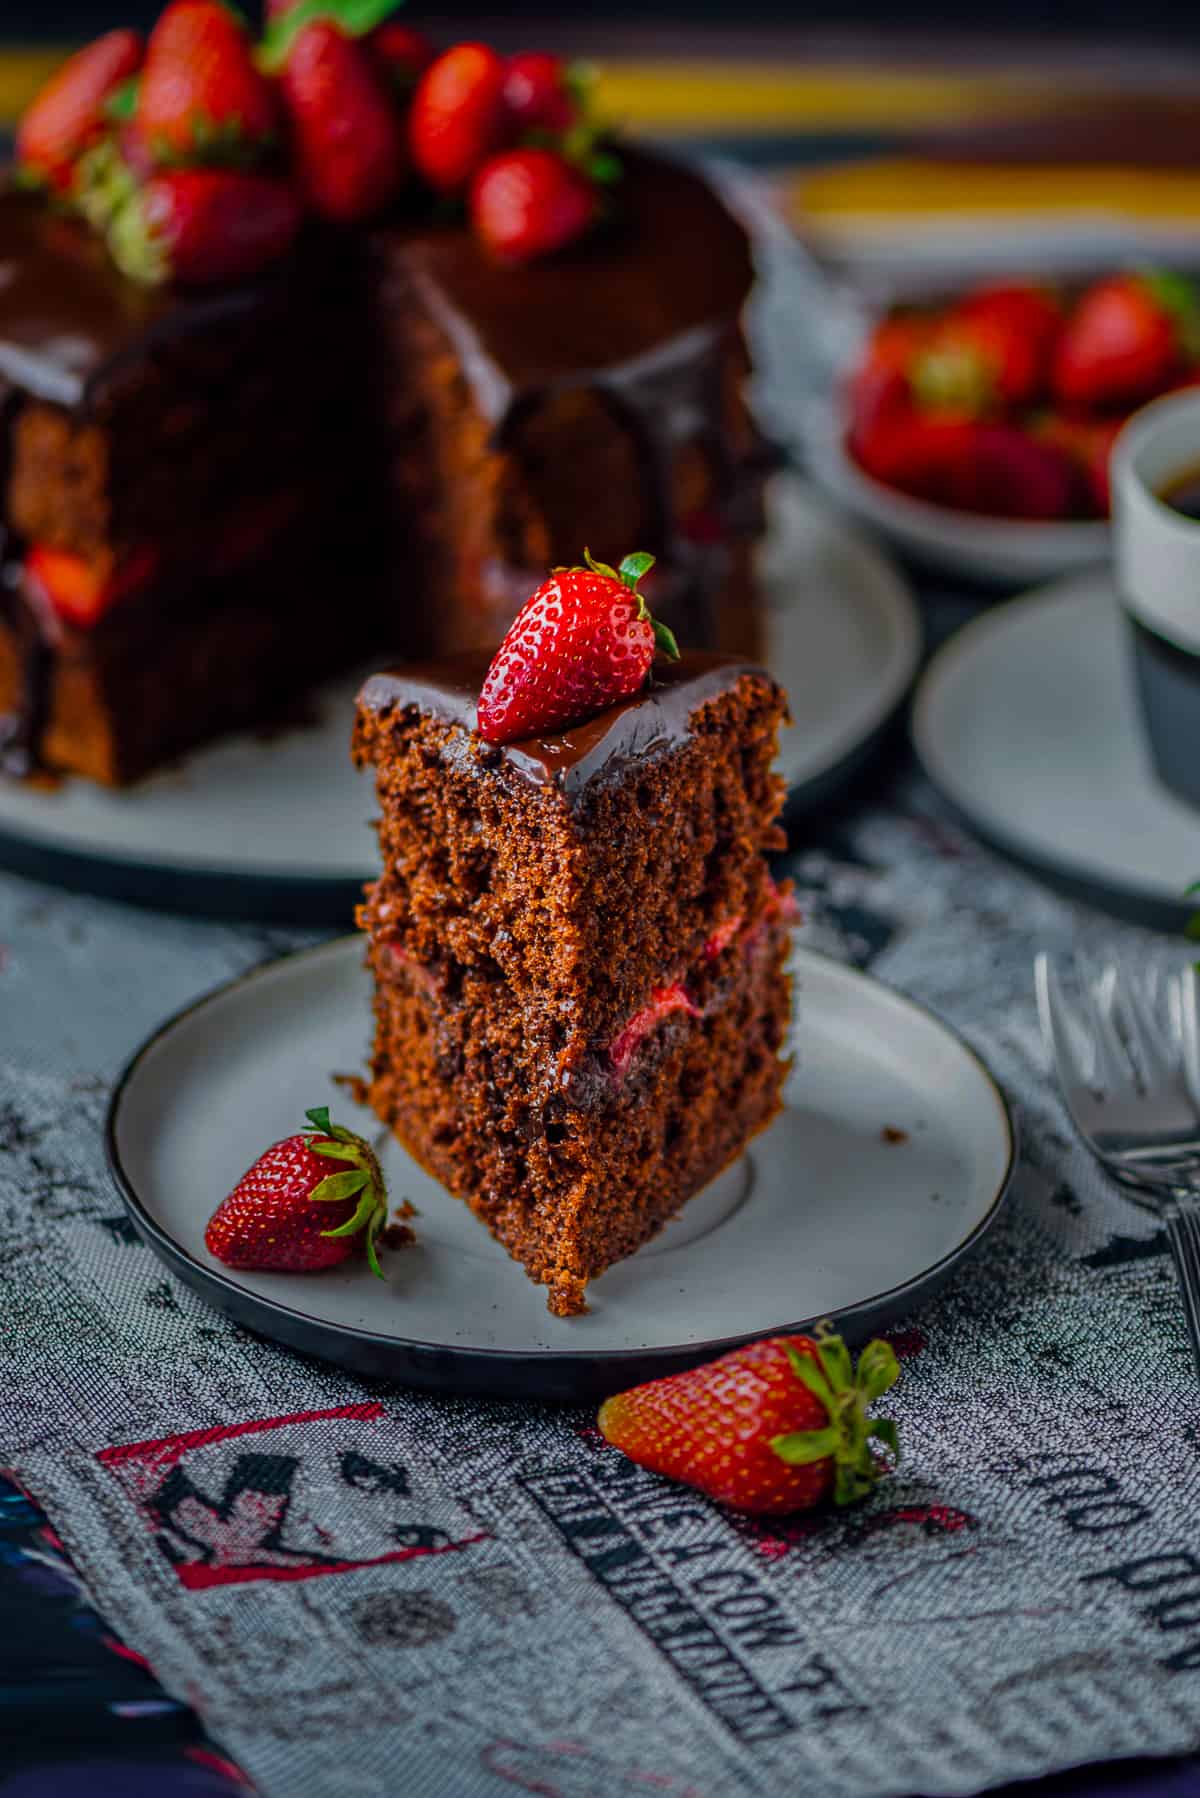 A slice of chocolate strawberry cake on a plate, the whole cake, strawberries and a coffee cup behind it.